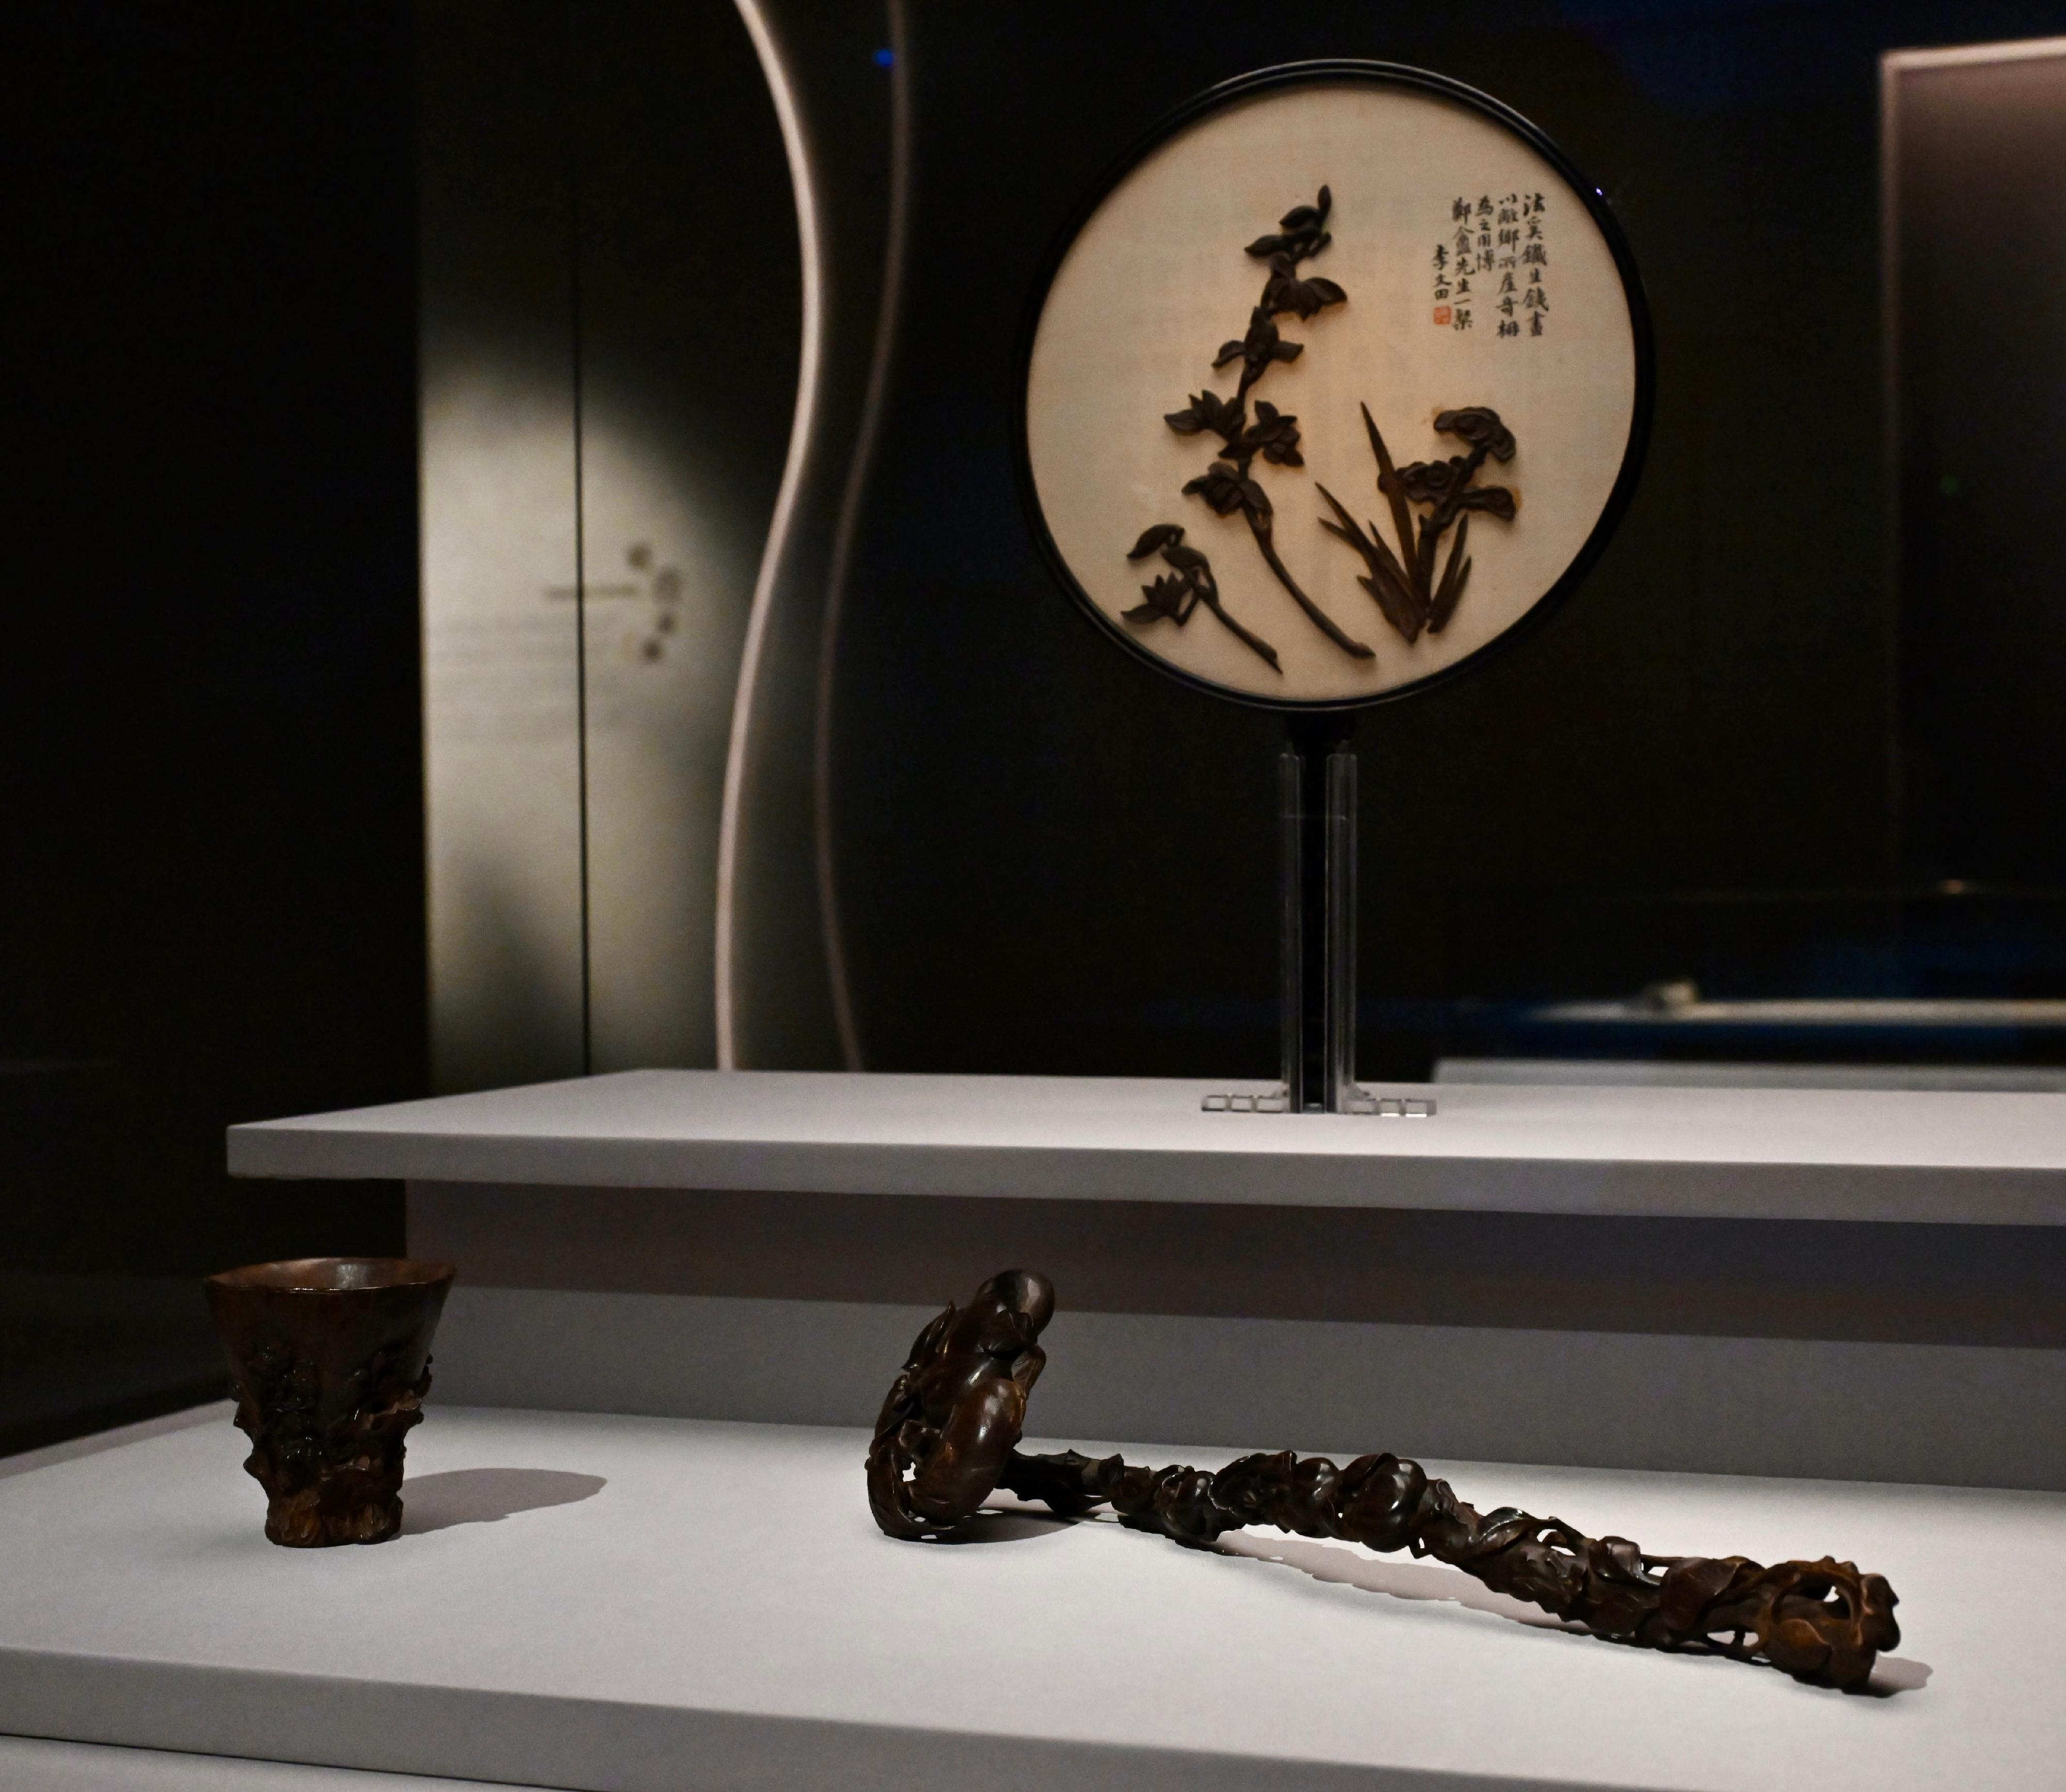 The opening ceremony of the "The Hong Kong Jockey Club Series: Fragrance of Time - In Search of Chinese Art of Scent" exhibition was held today (June 27) at the Hong Kong Museum of Art. Photo shows exhibits carved with agarwood from the Shanghai Museum collection, including a round fan inlaid with carved agarwood in a lingzhi and orchid design from the Qing dynasty.